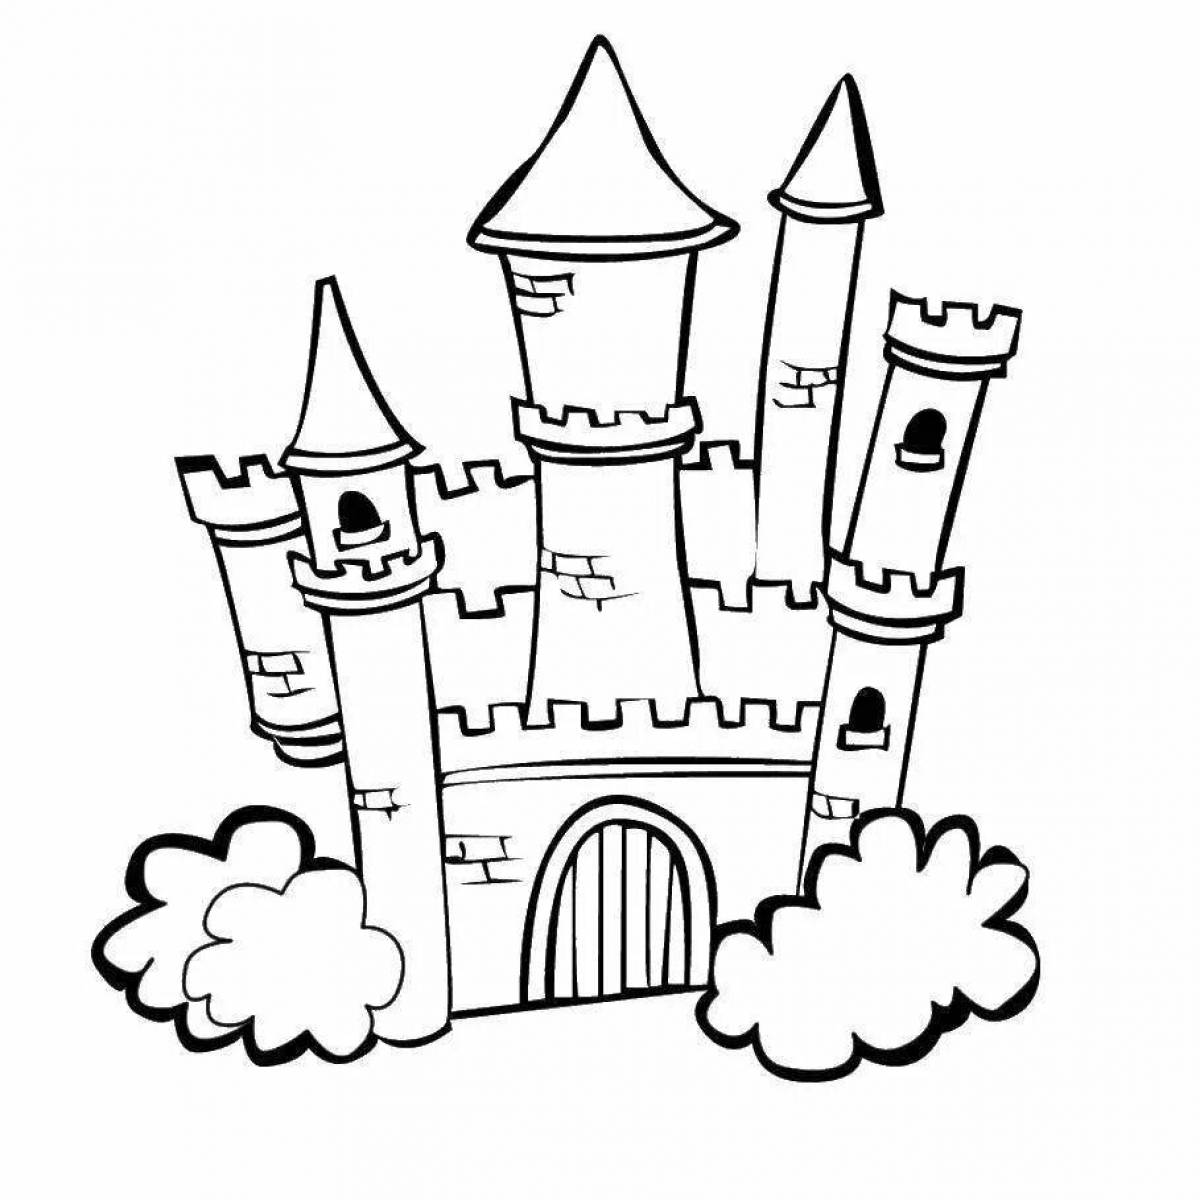 Colouring bright castles for girls